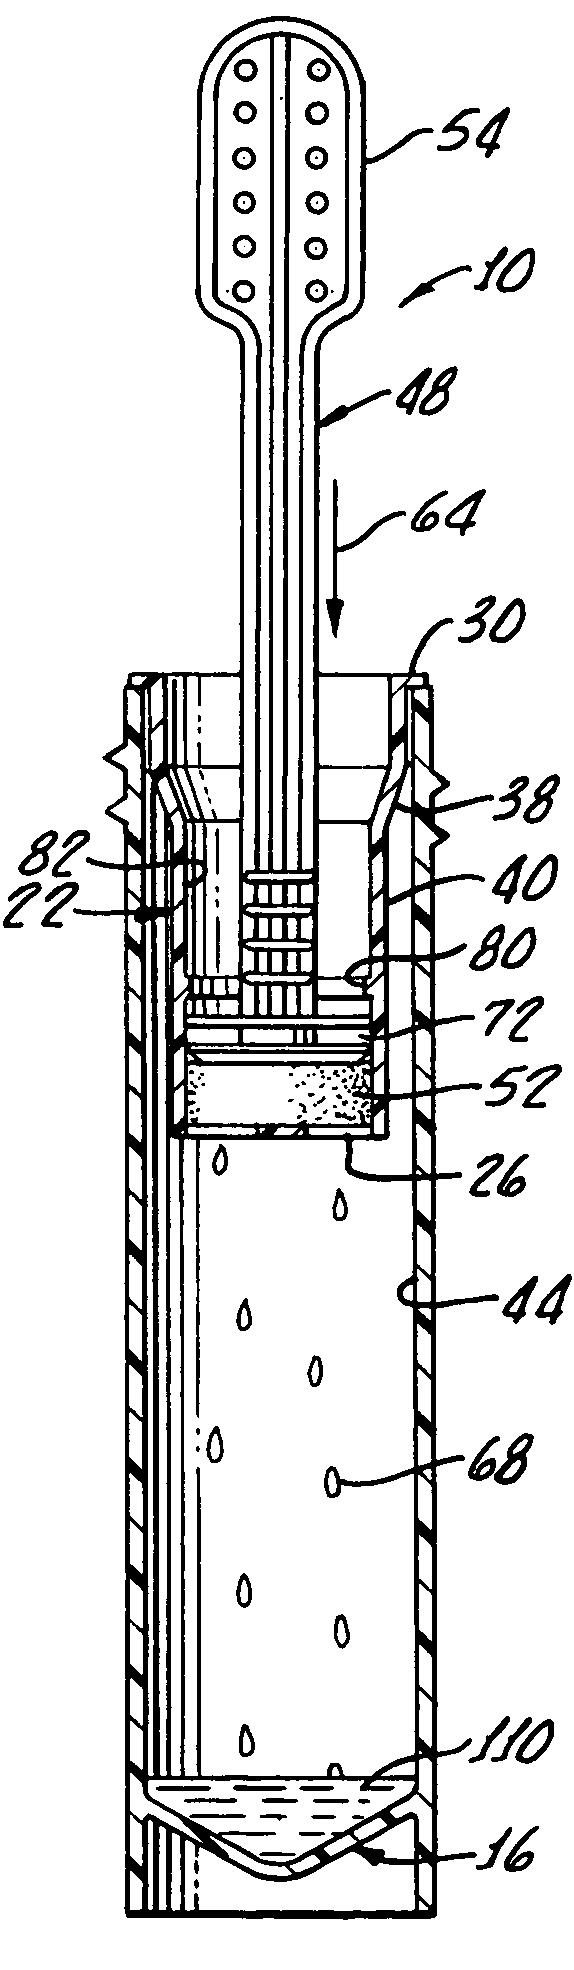 Fluid collection and testing device